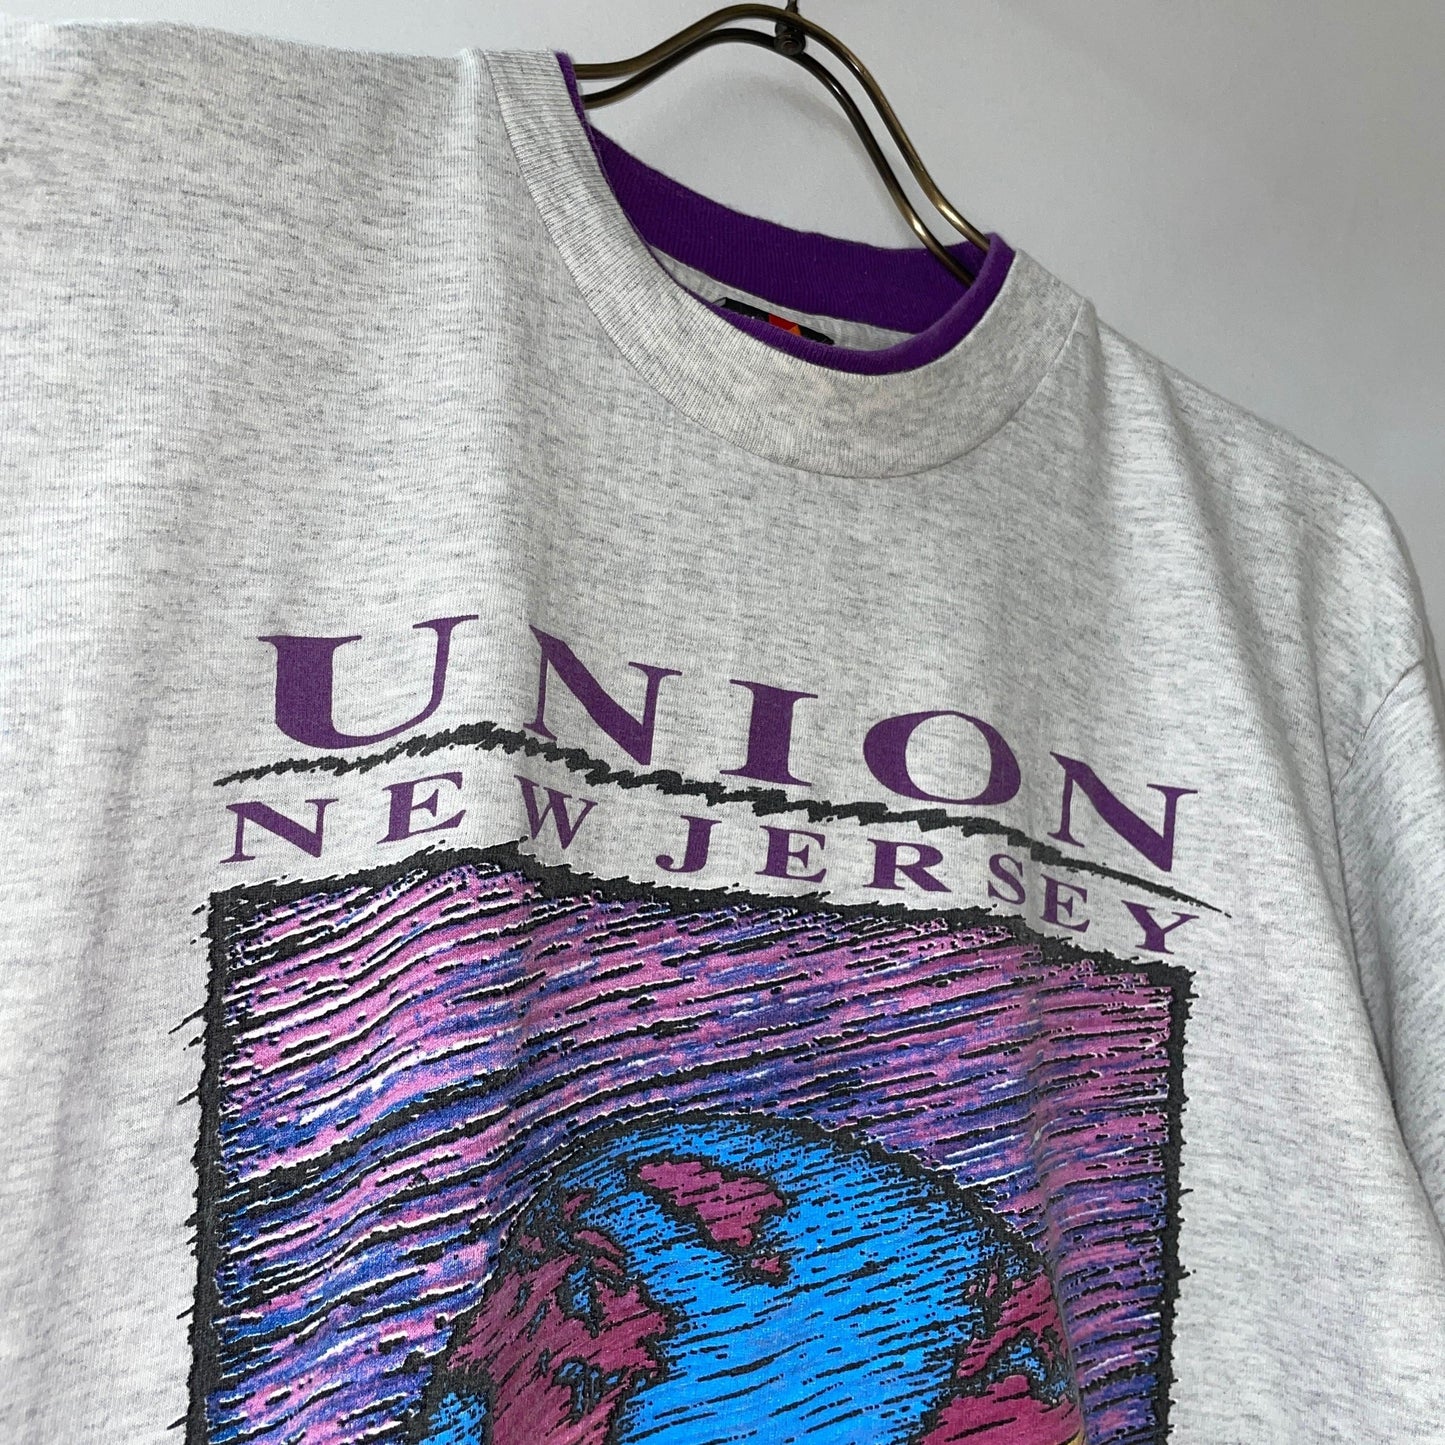 90's Vintage Tee Tシャツ　シングルステッチ